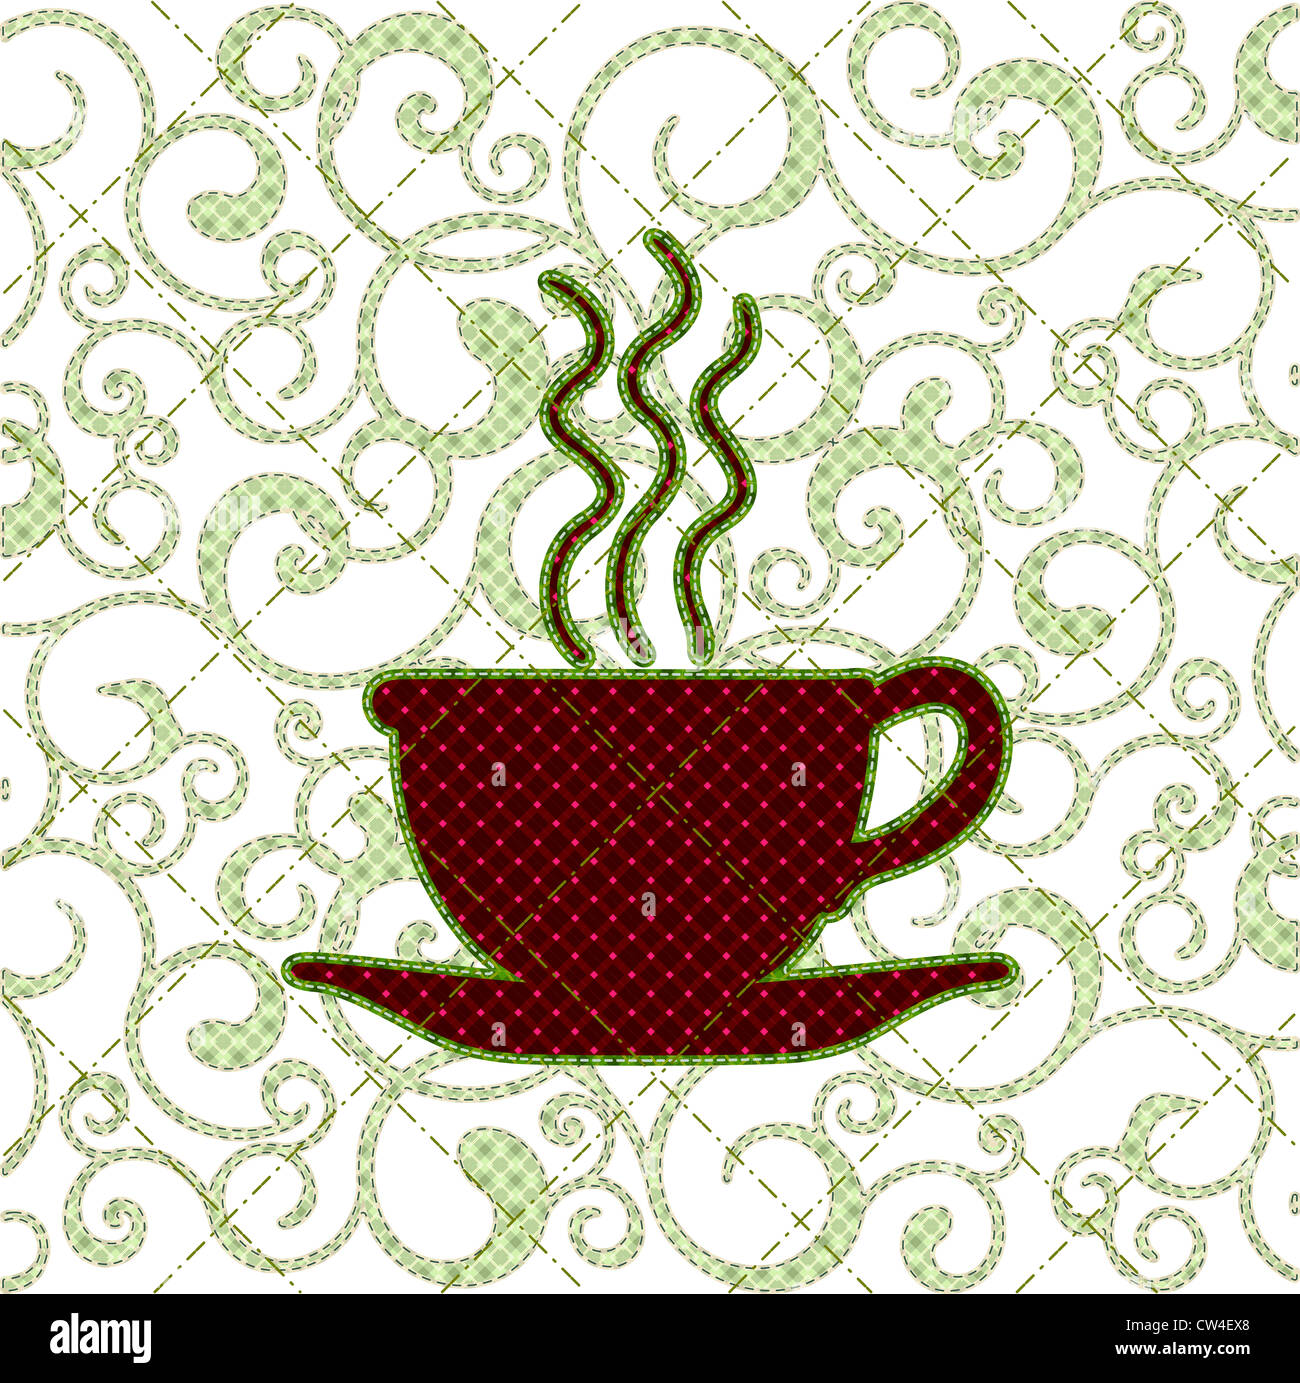 Illustrations patchwork of Coffee cup Stock Photo